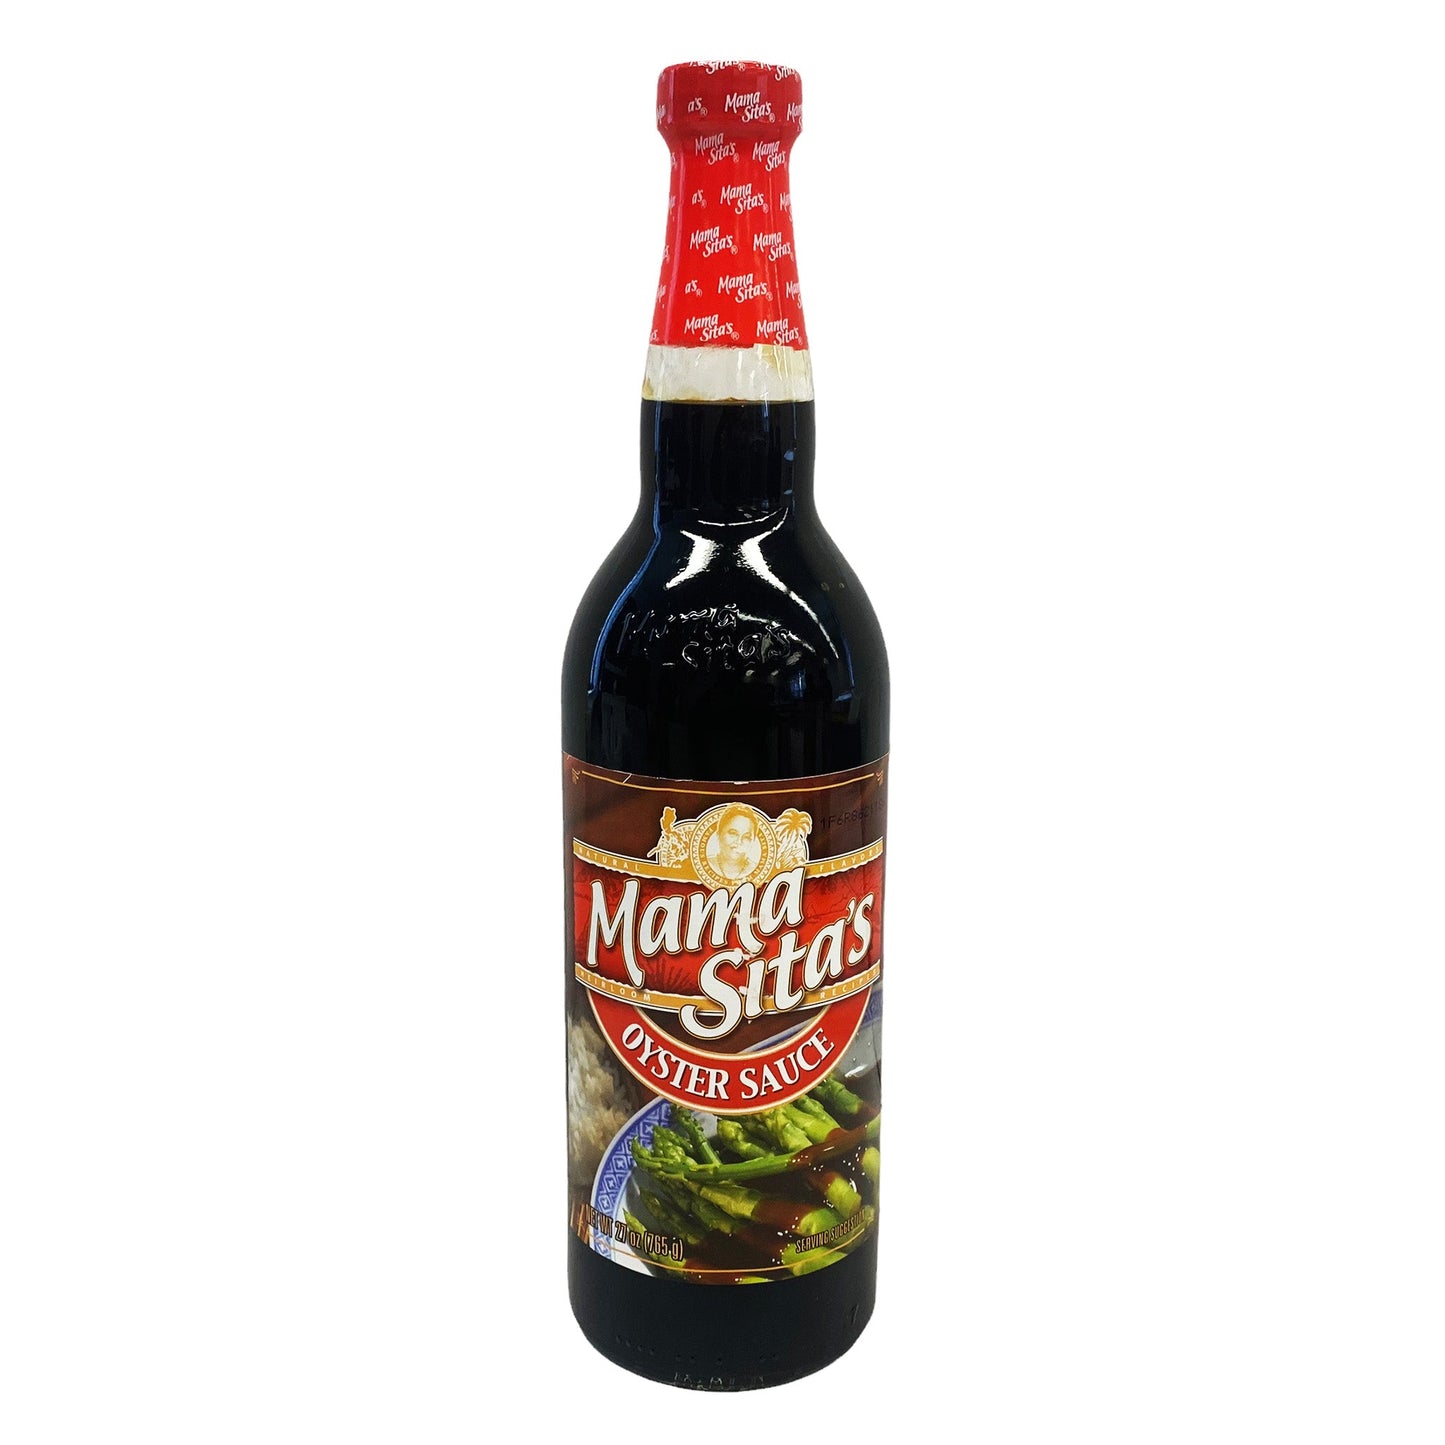 Front graphic image of Mama Sita Oyster Sauce 27oz